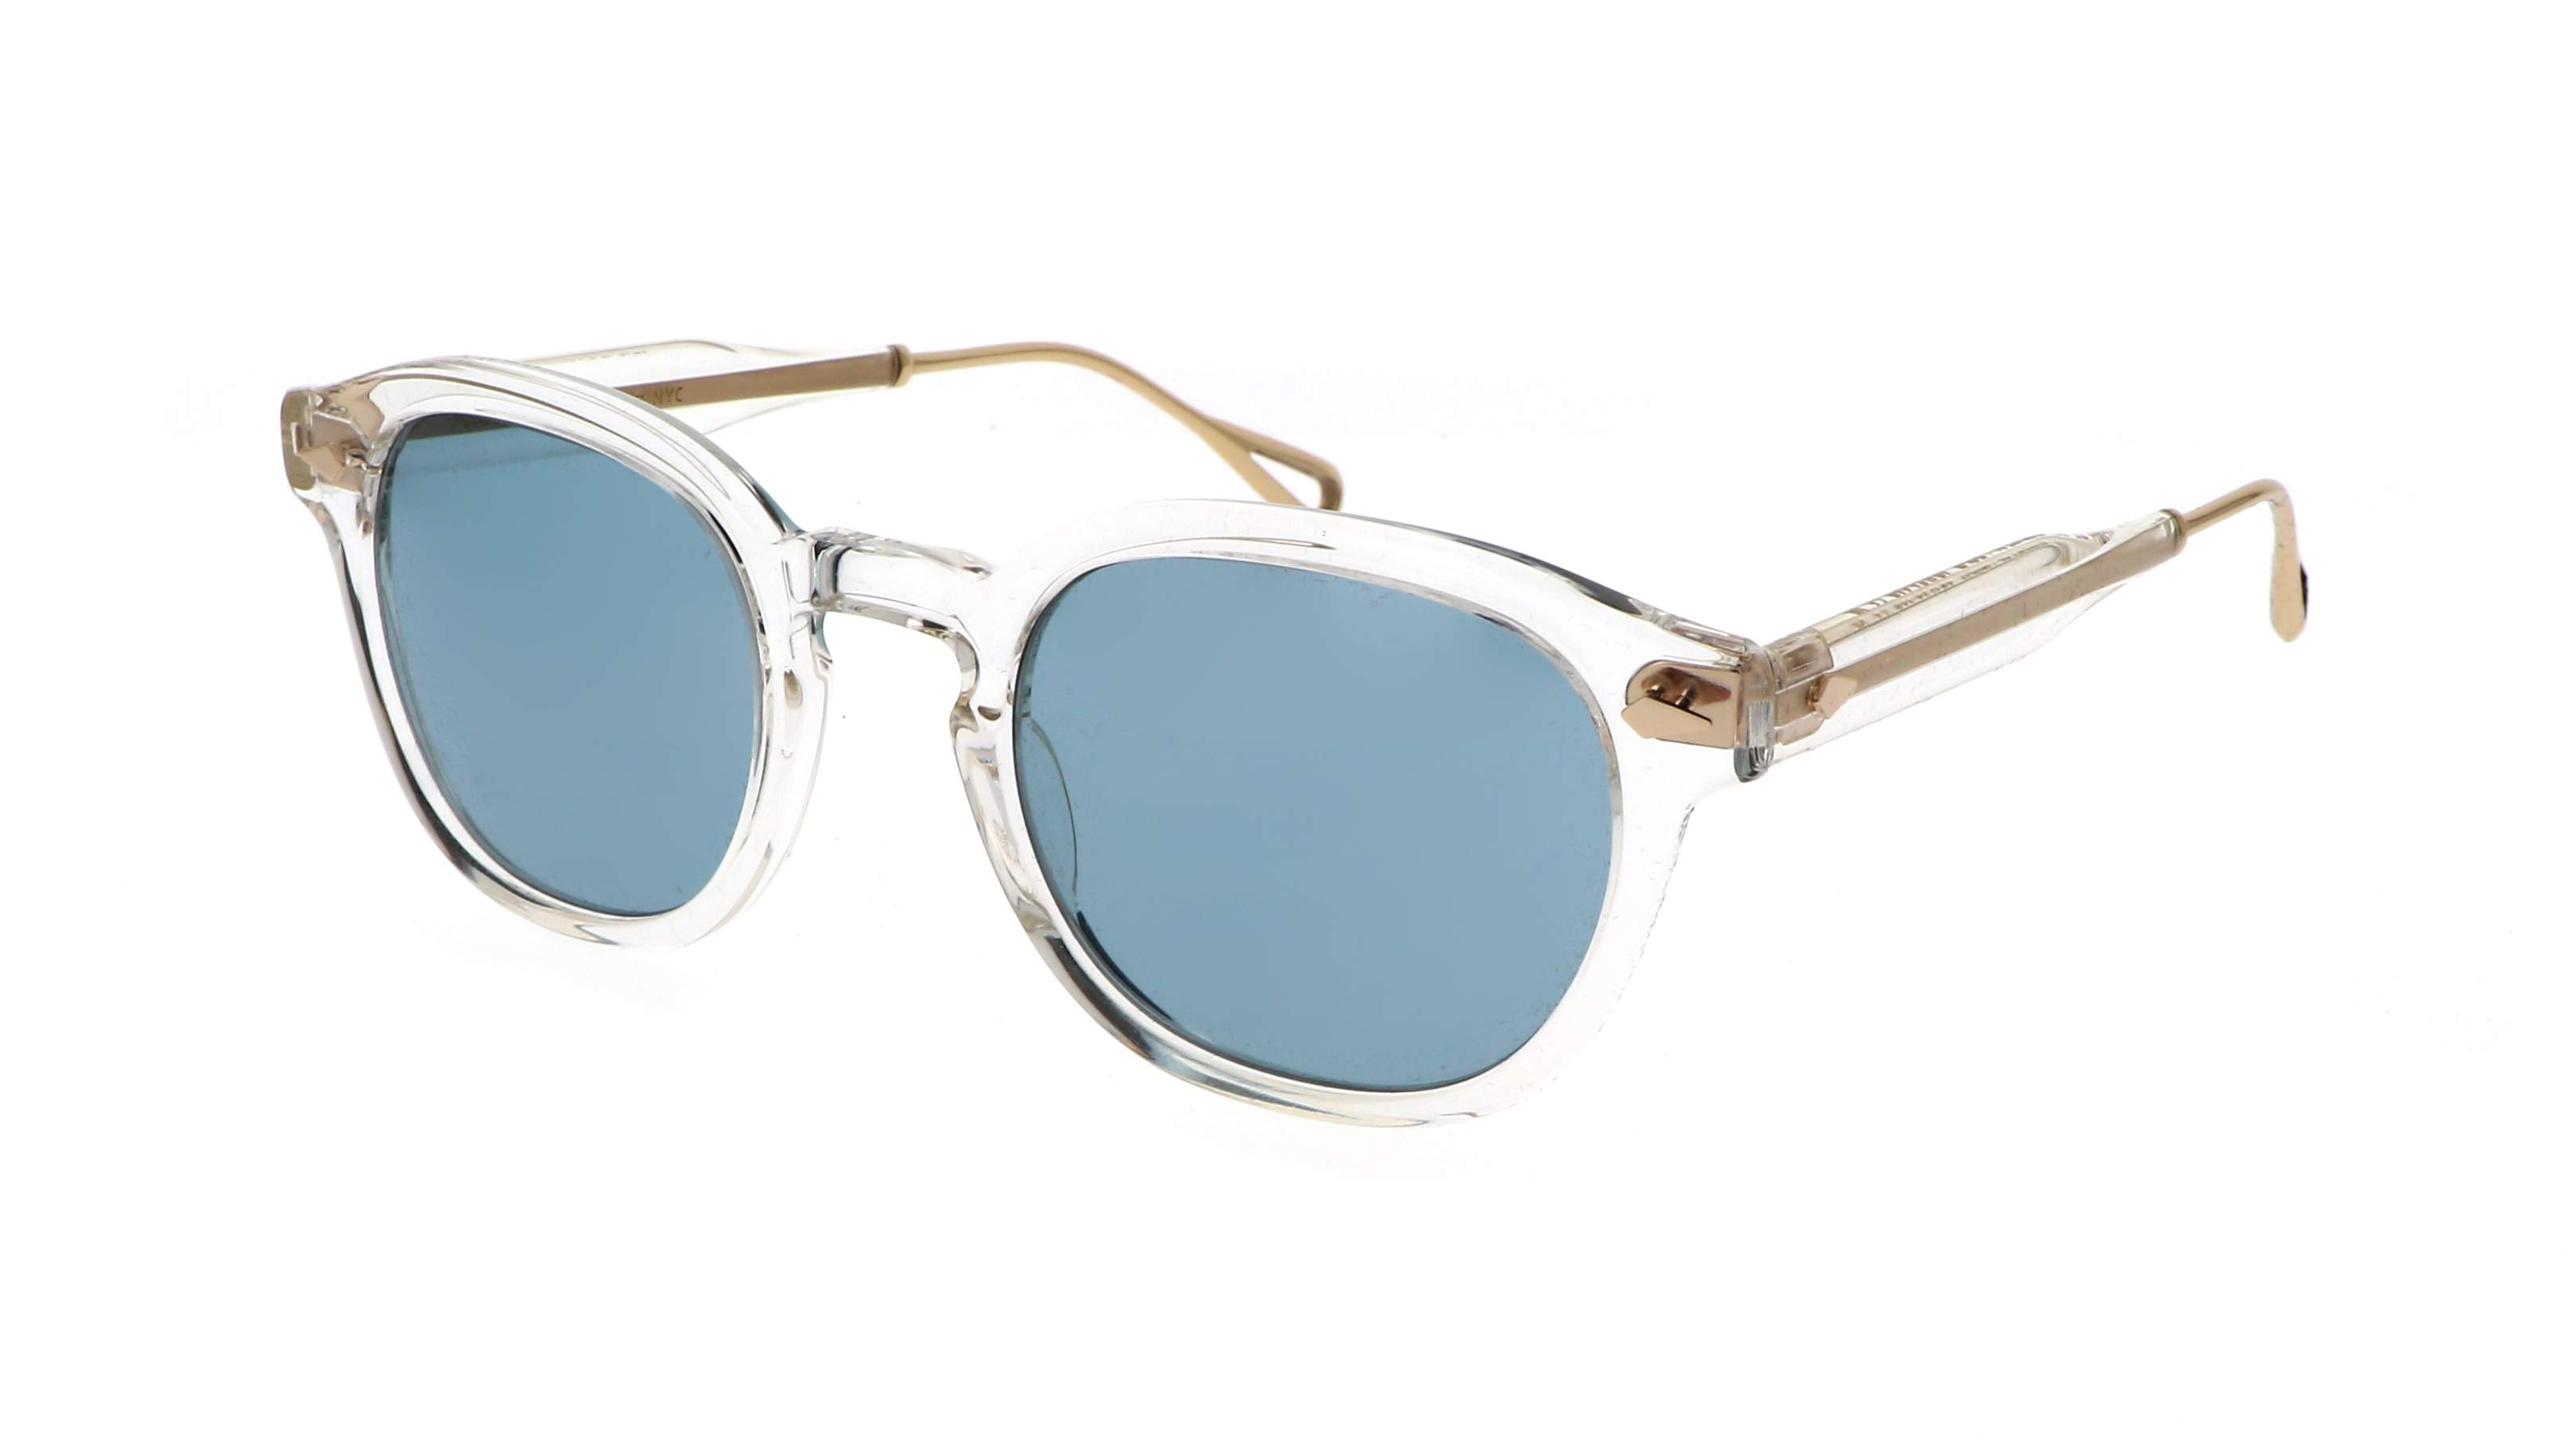 Sunglasses Moscot Lemtosh TT 49 CRYSTAL GOLD in stock | Price 312,50 ...